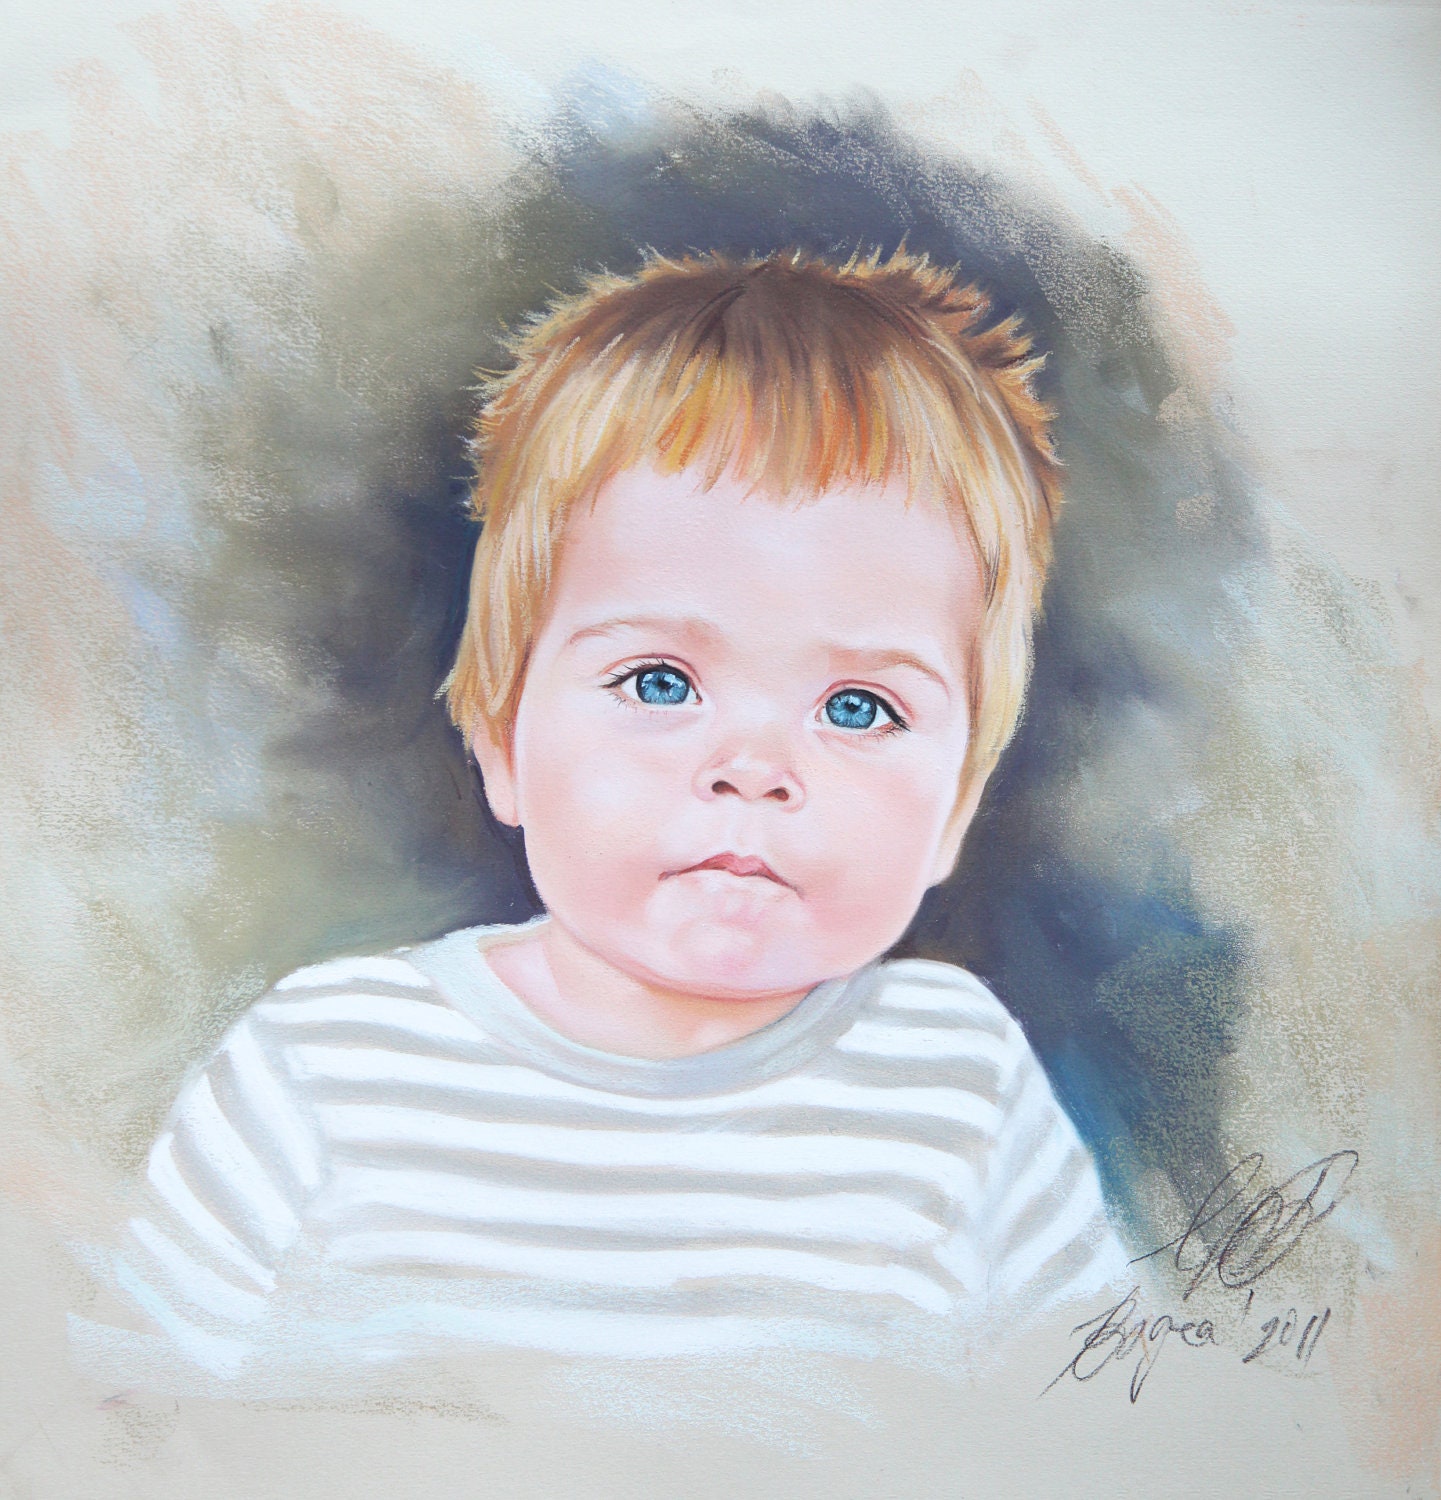 Custom Pastel Portrait Painting of Child From Photography - Etsy